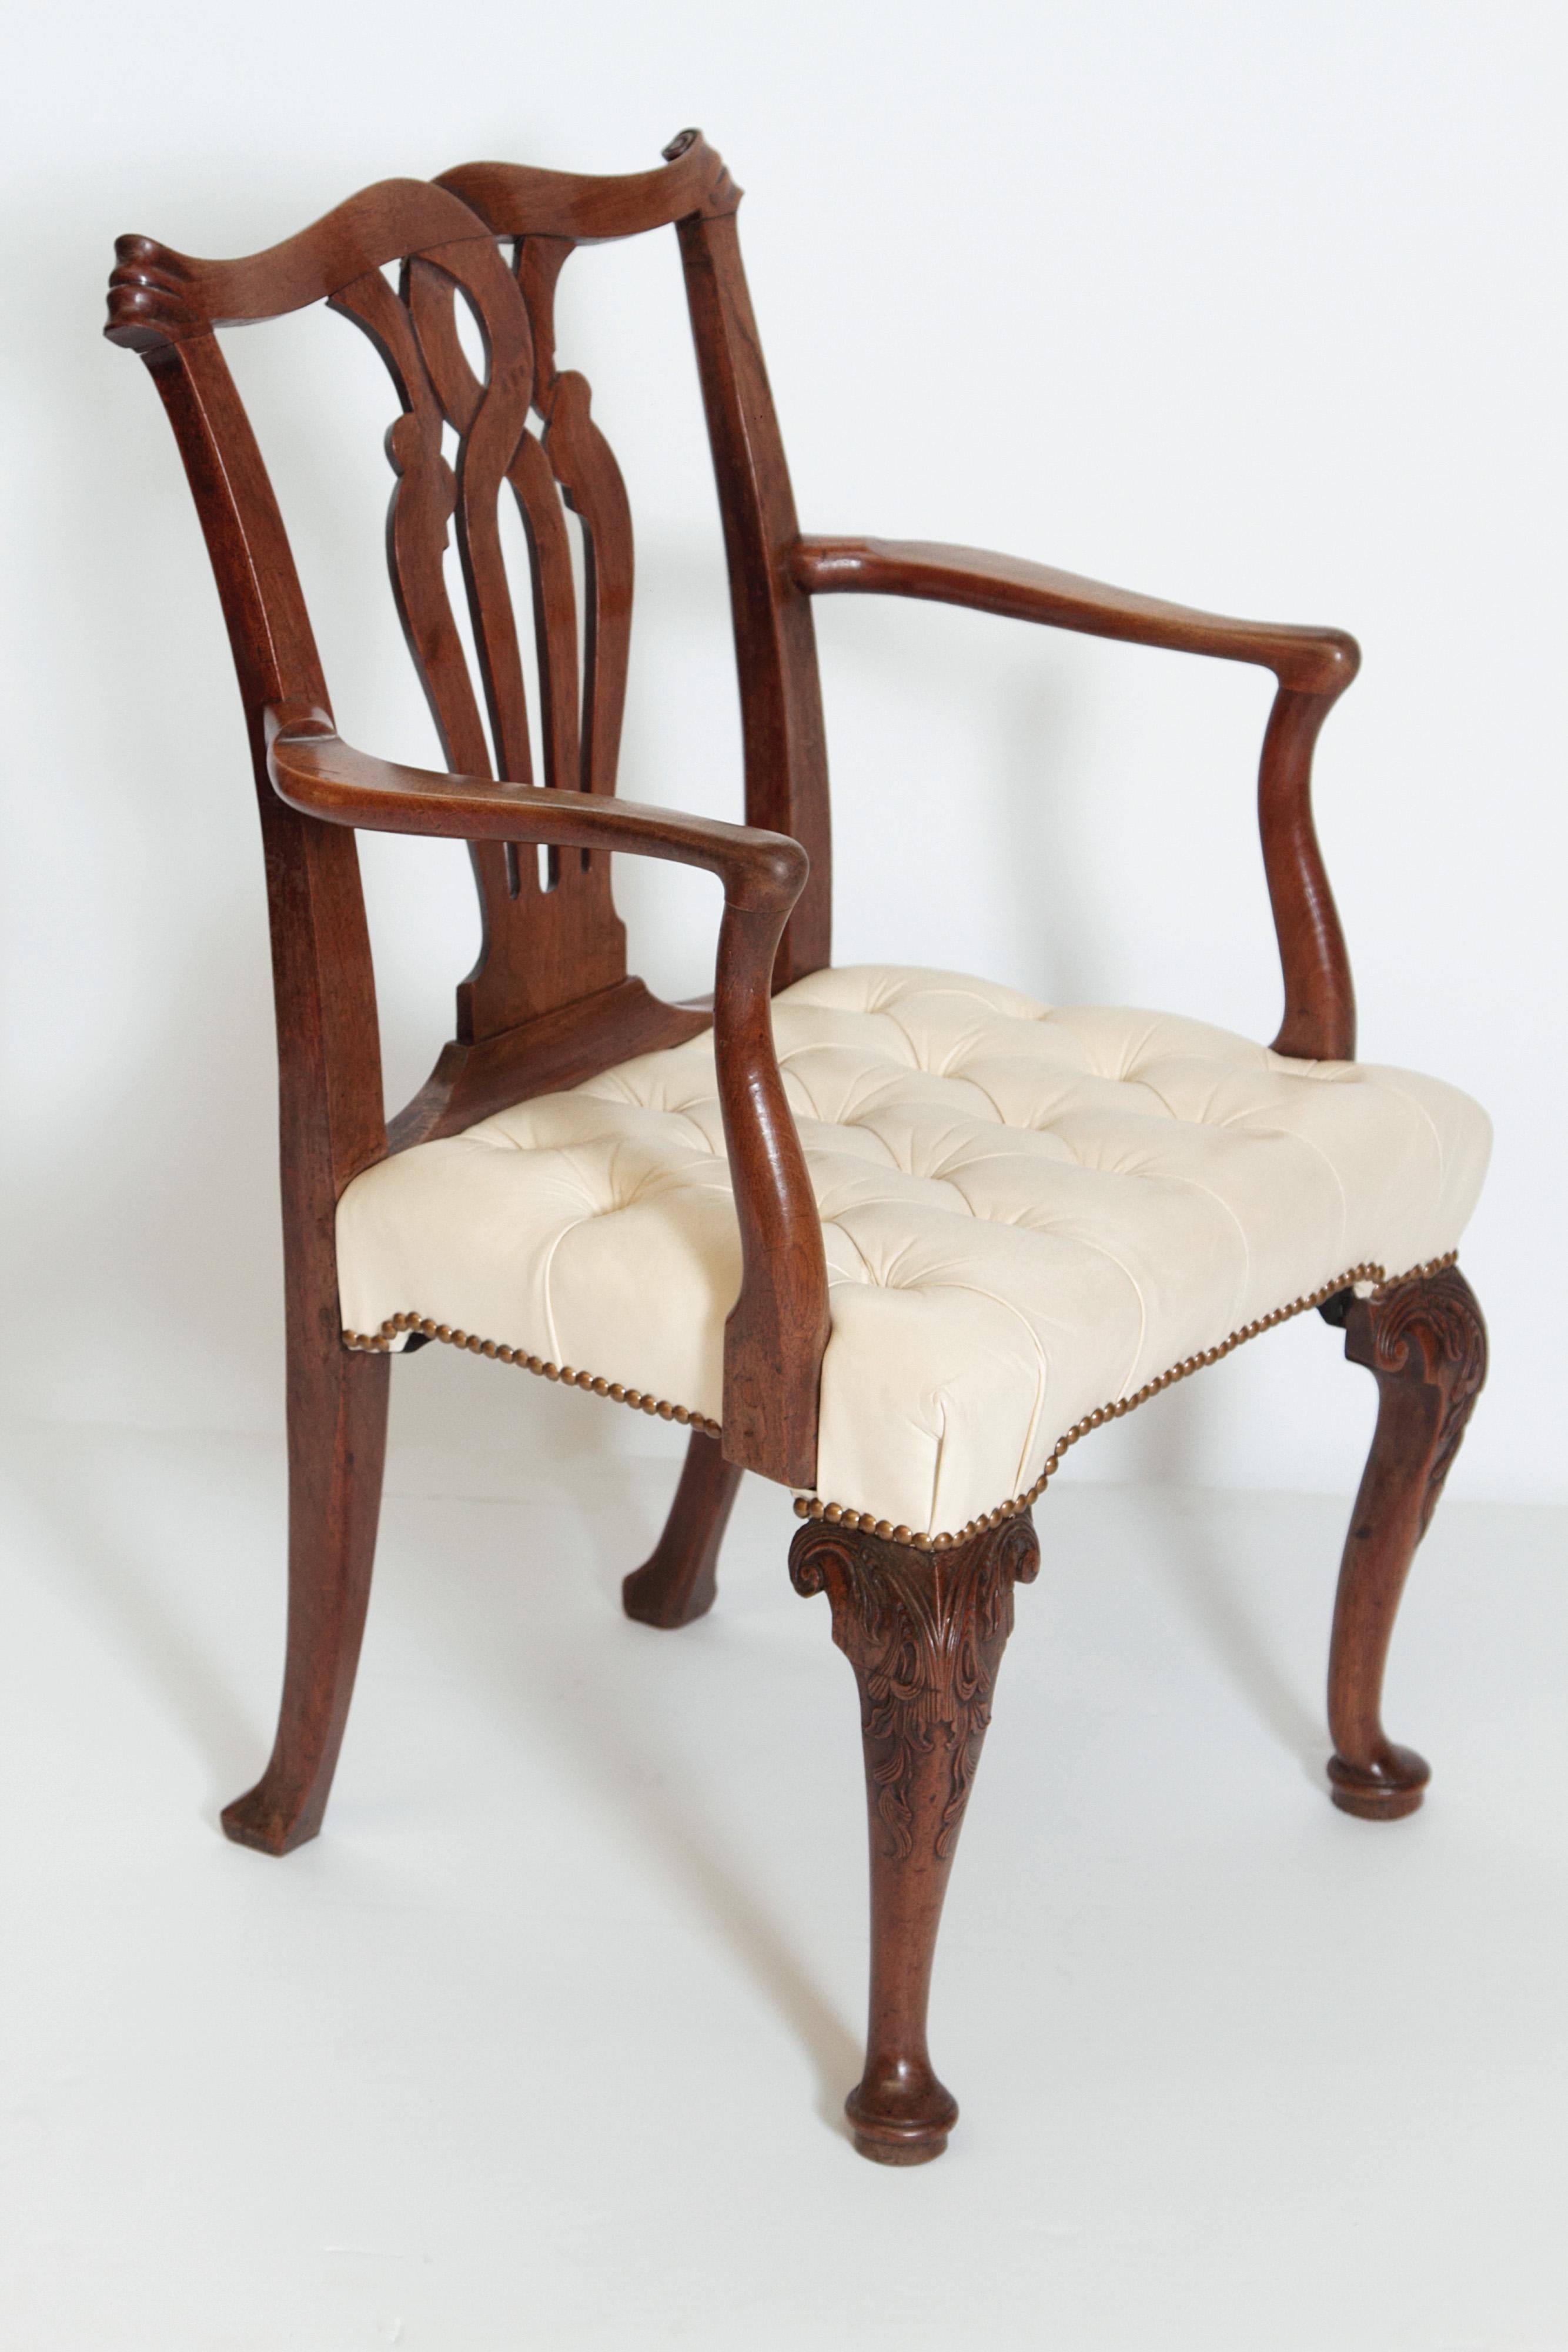 18th century chippendale chair